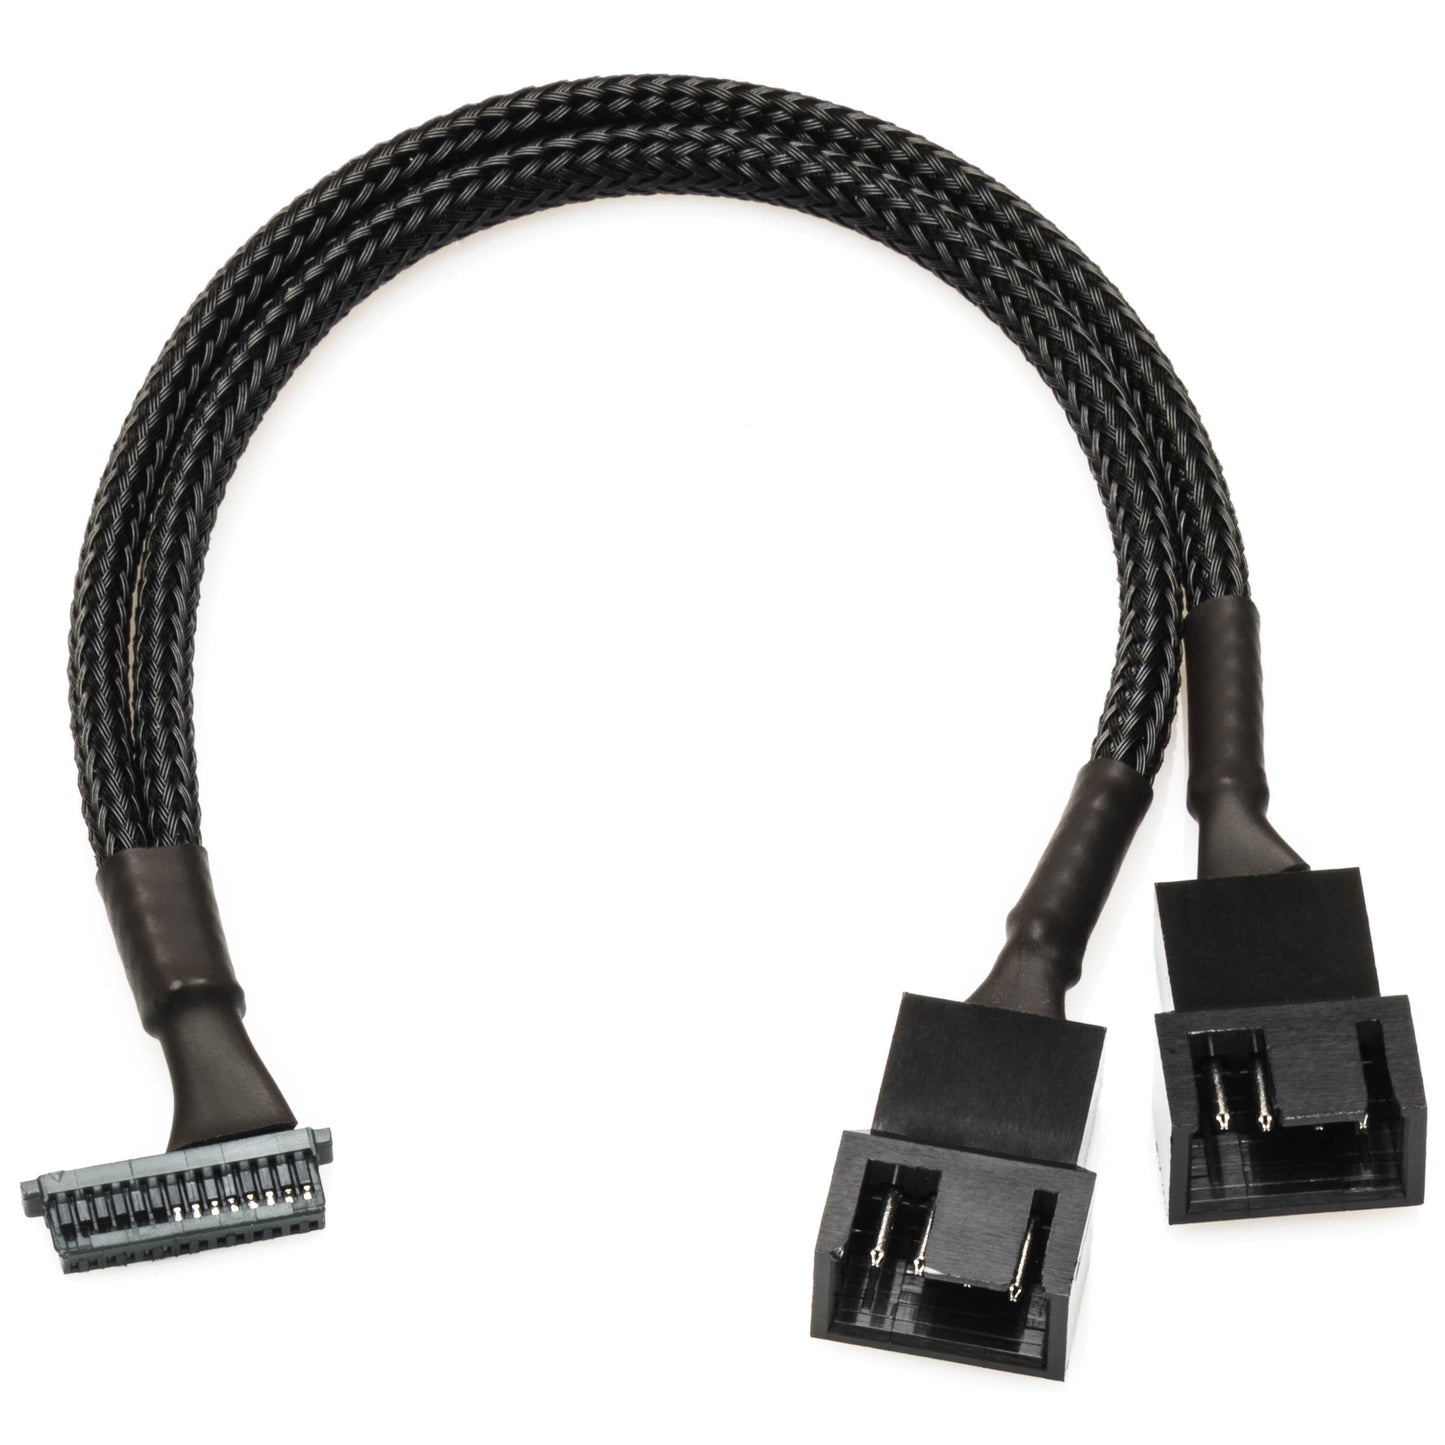 Micro SH 14-Pin to Dual 4-Pin PWM Fan Adapter Cable for RTX 2000 Series GPUs